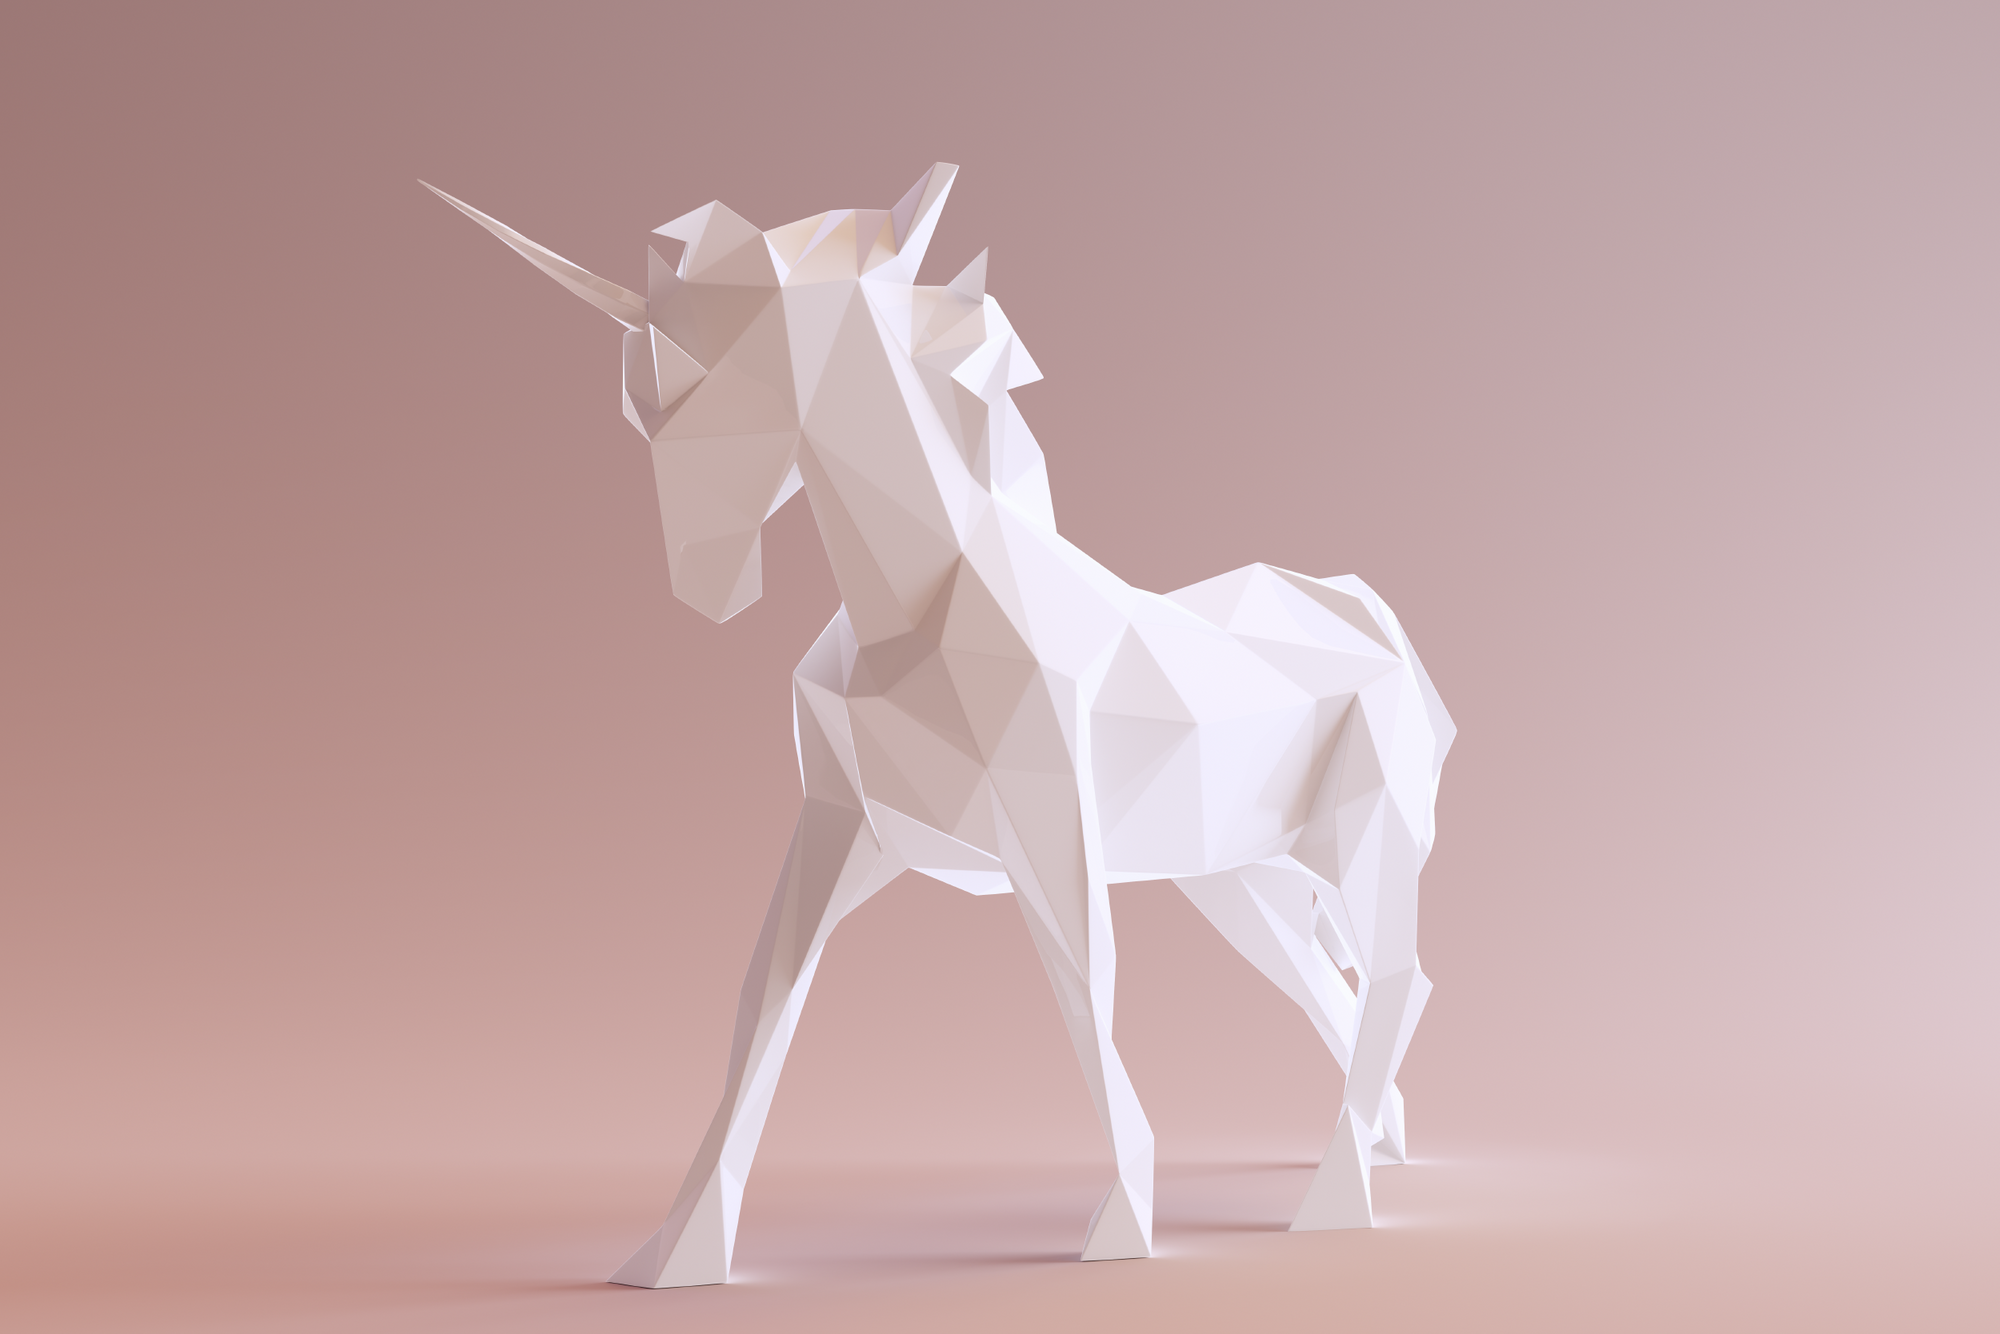 Investing in unicorns - What you need to know!